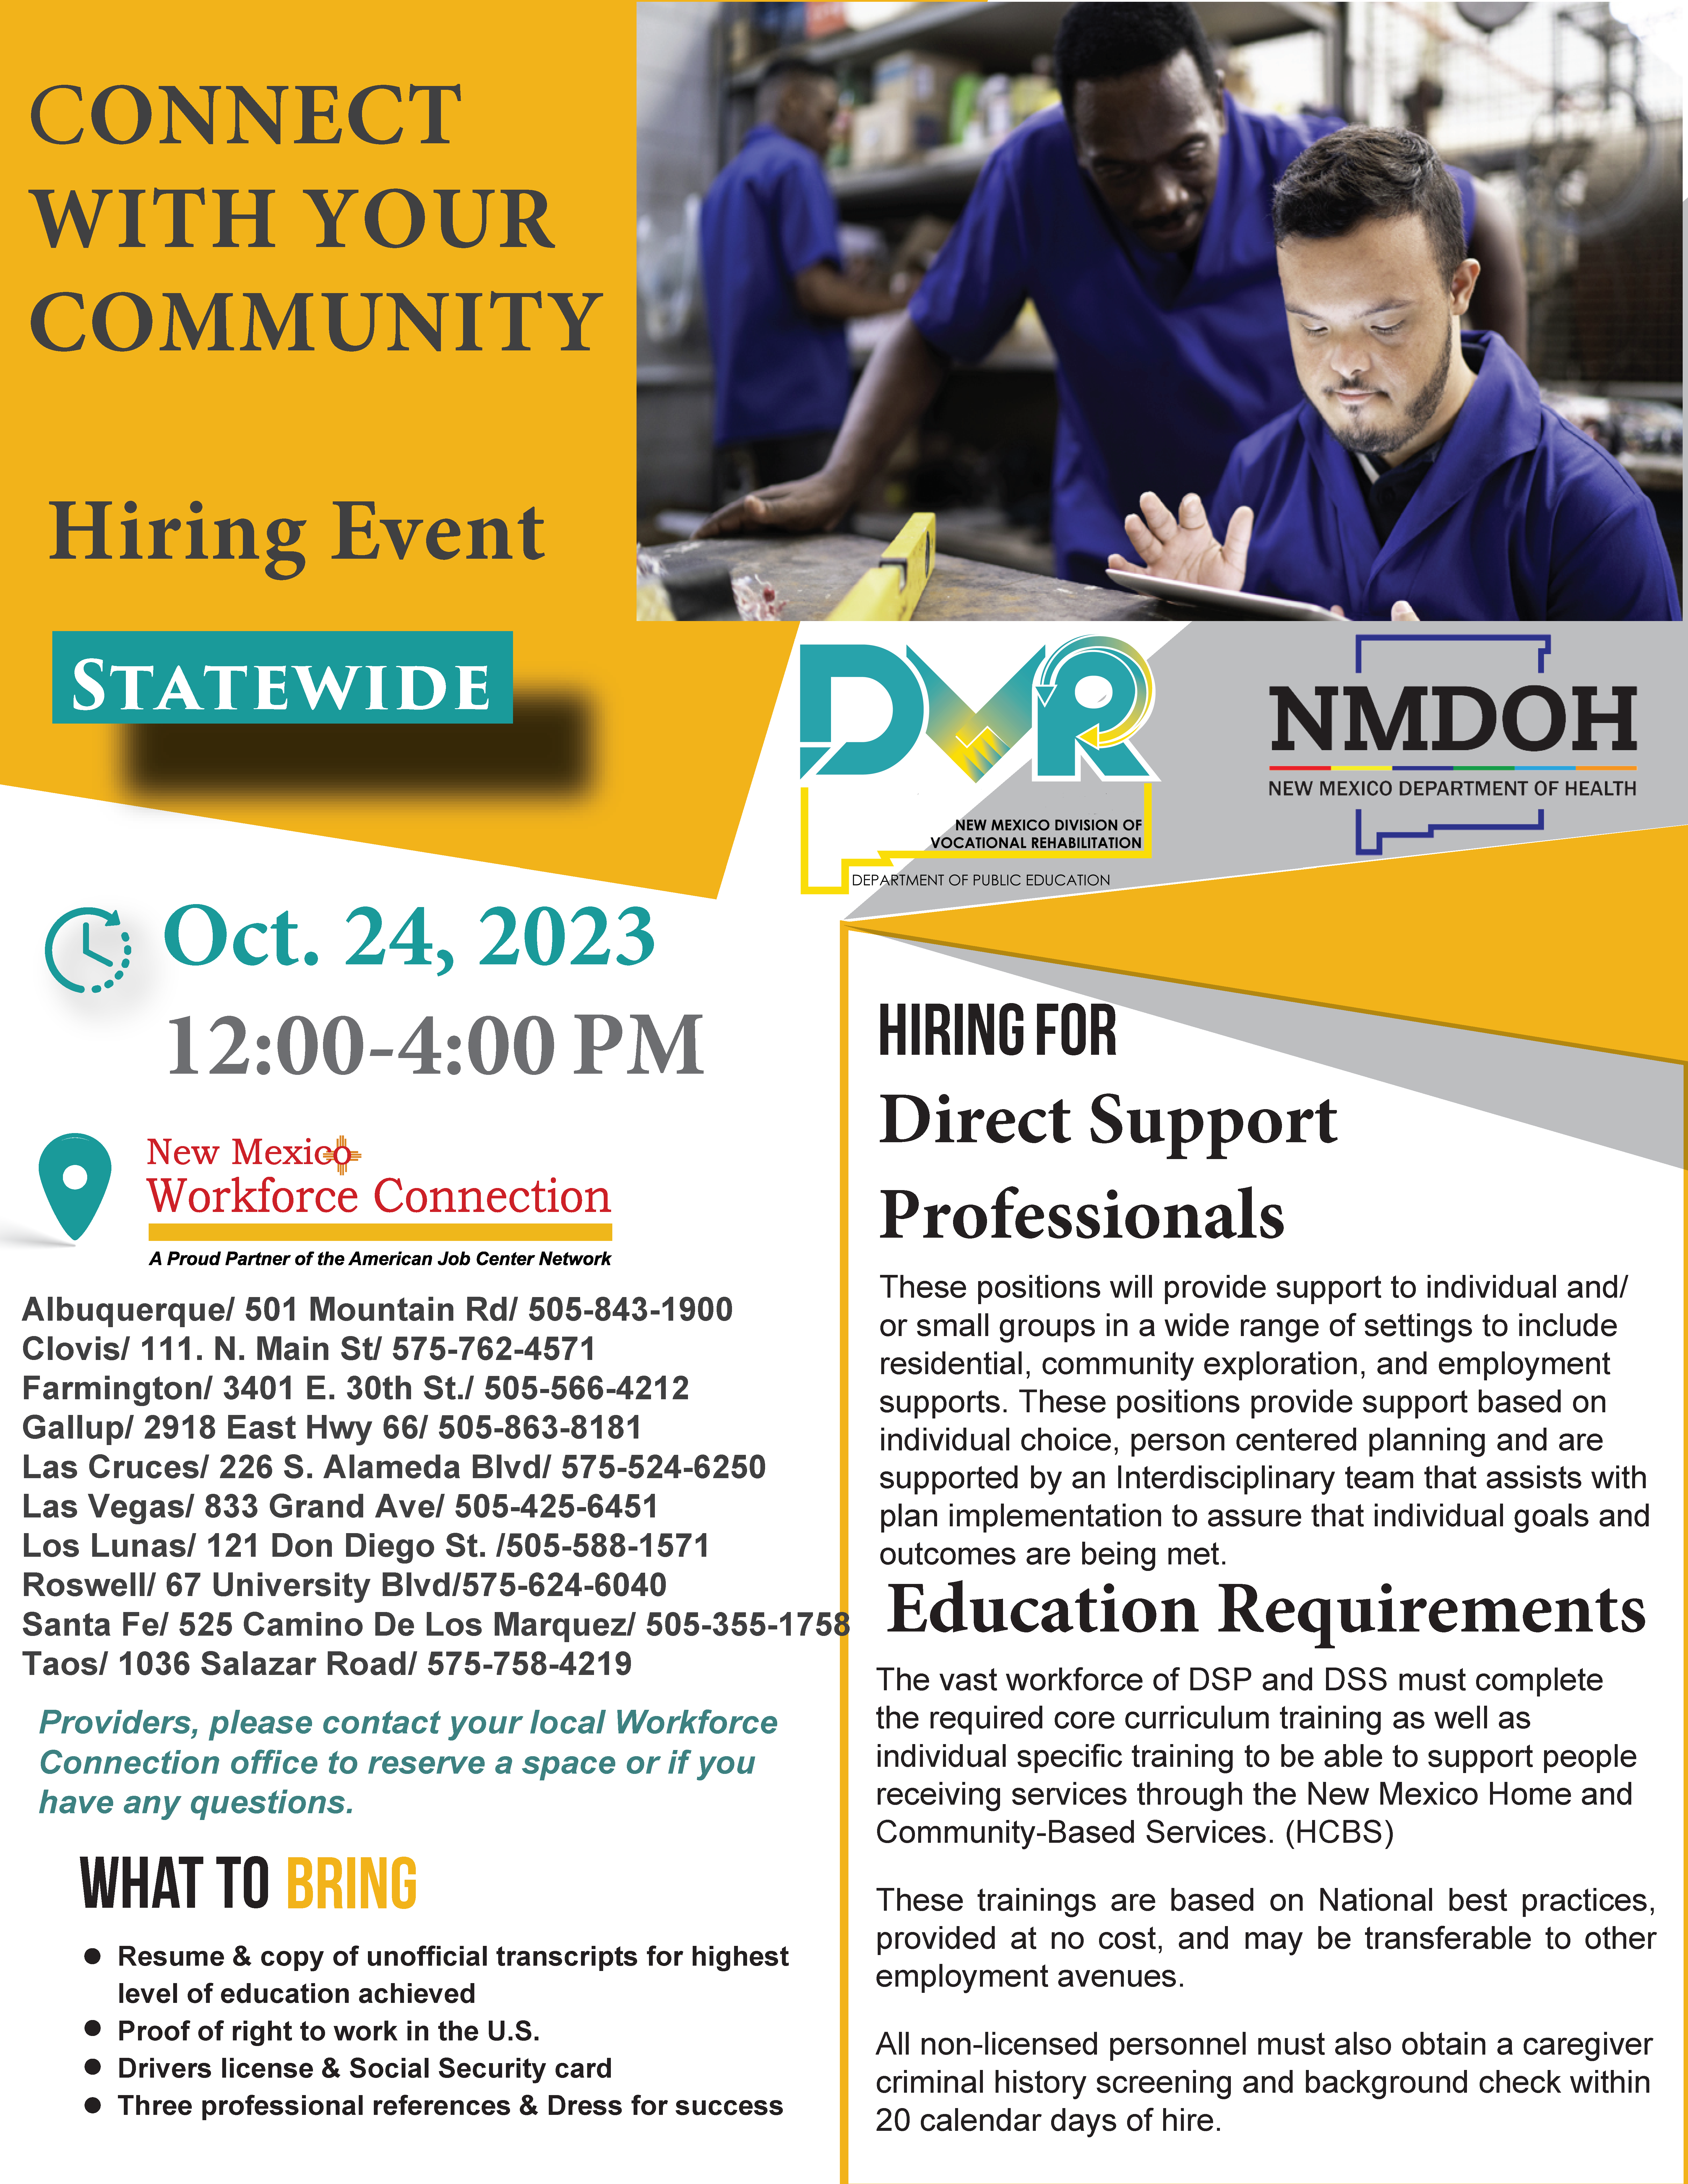 Connect with Your Community Hiring Event flyer